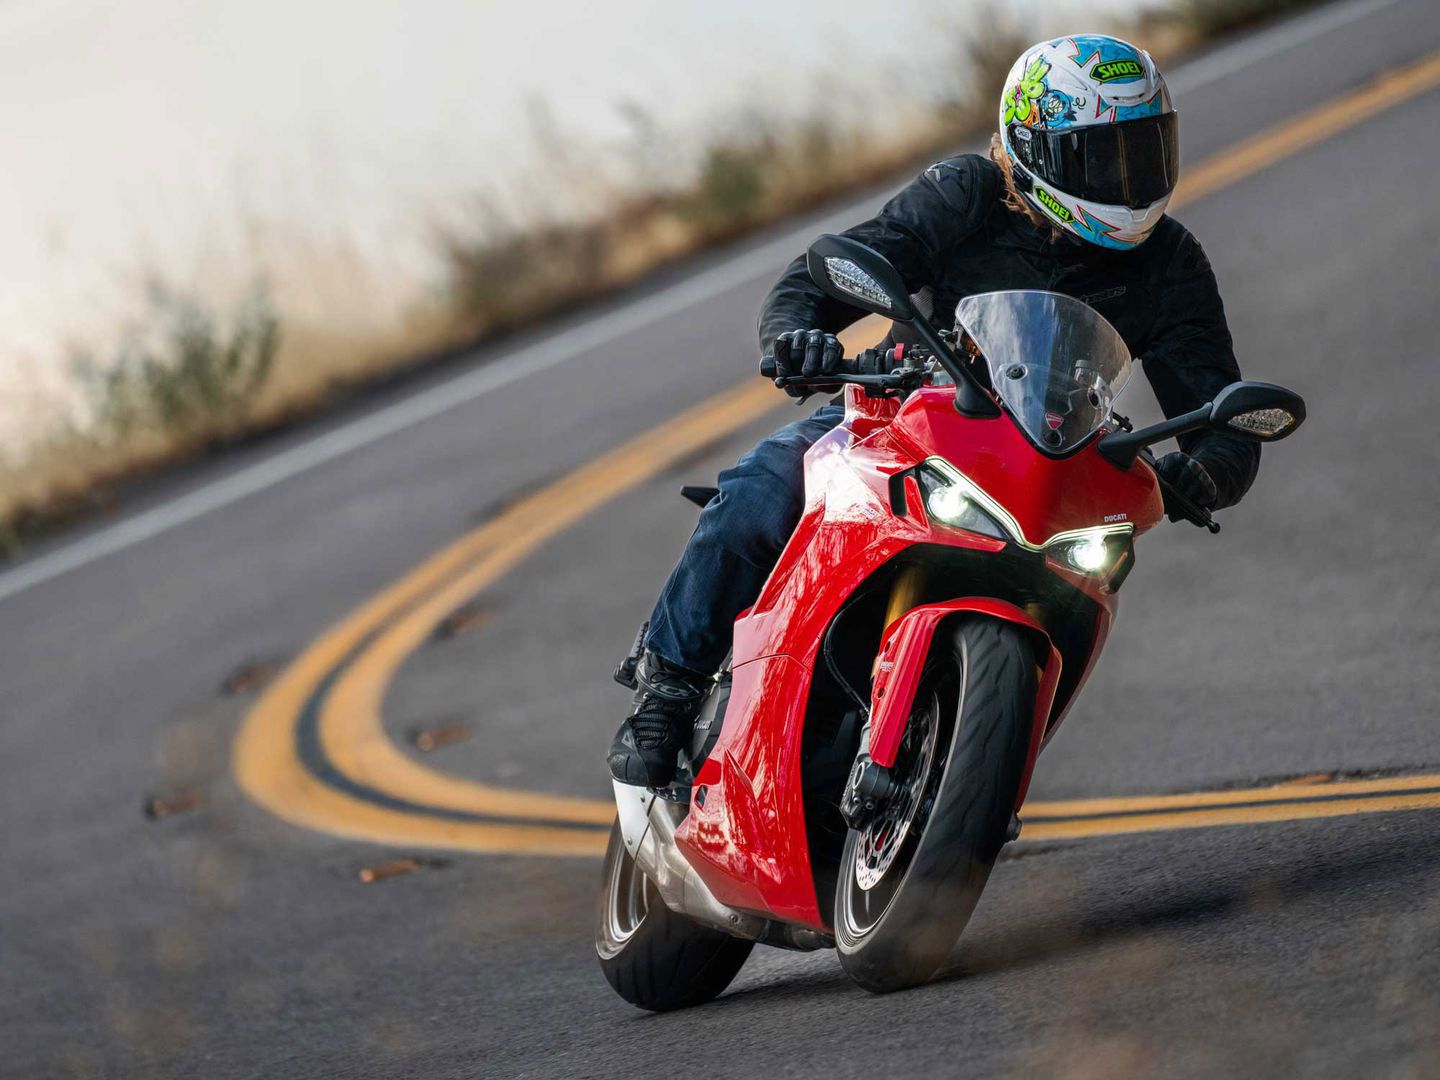 Ducati offers up a more mass-appealing sportbike in the SuperSport 950 S.